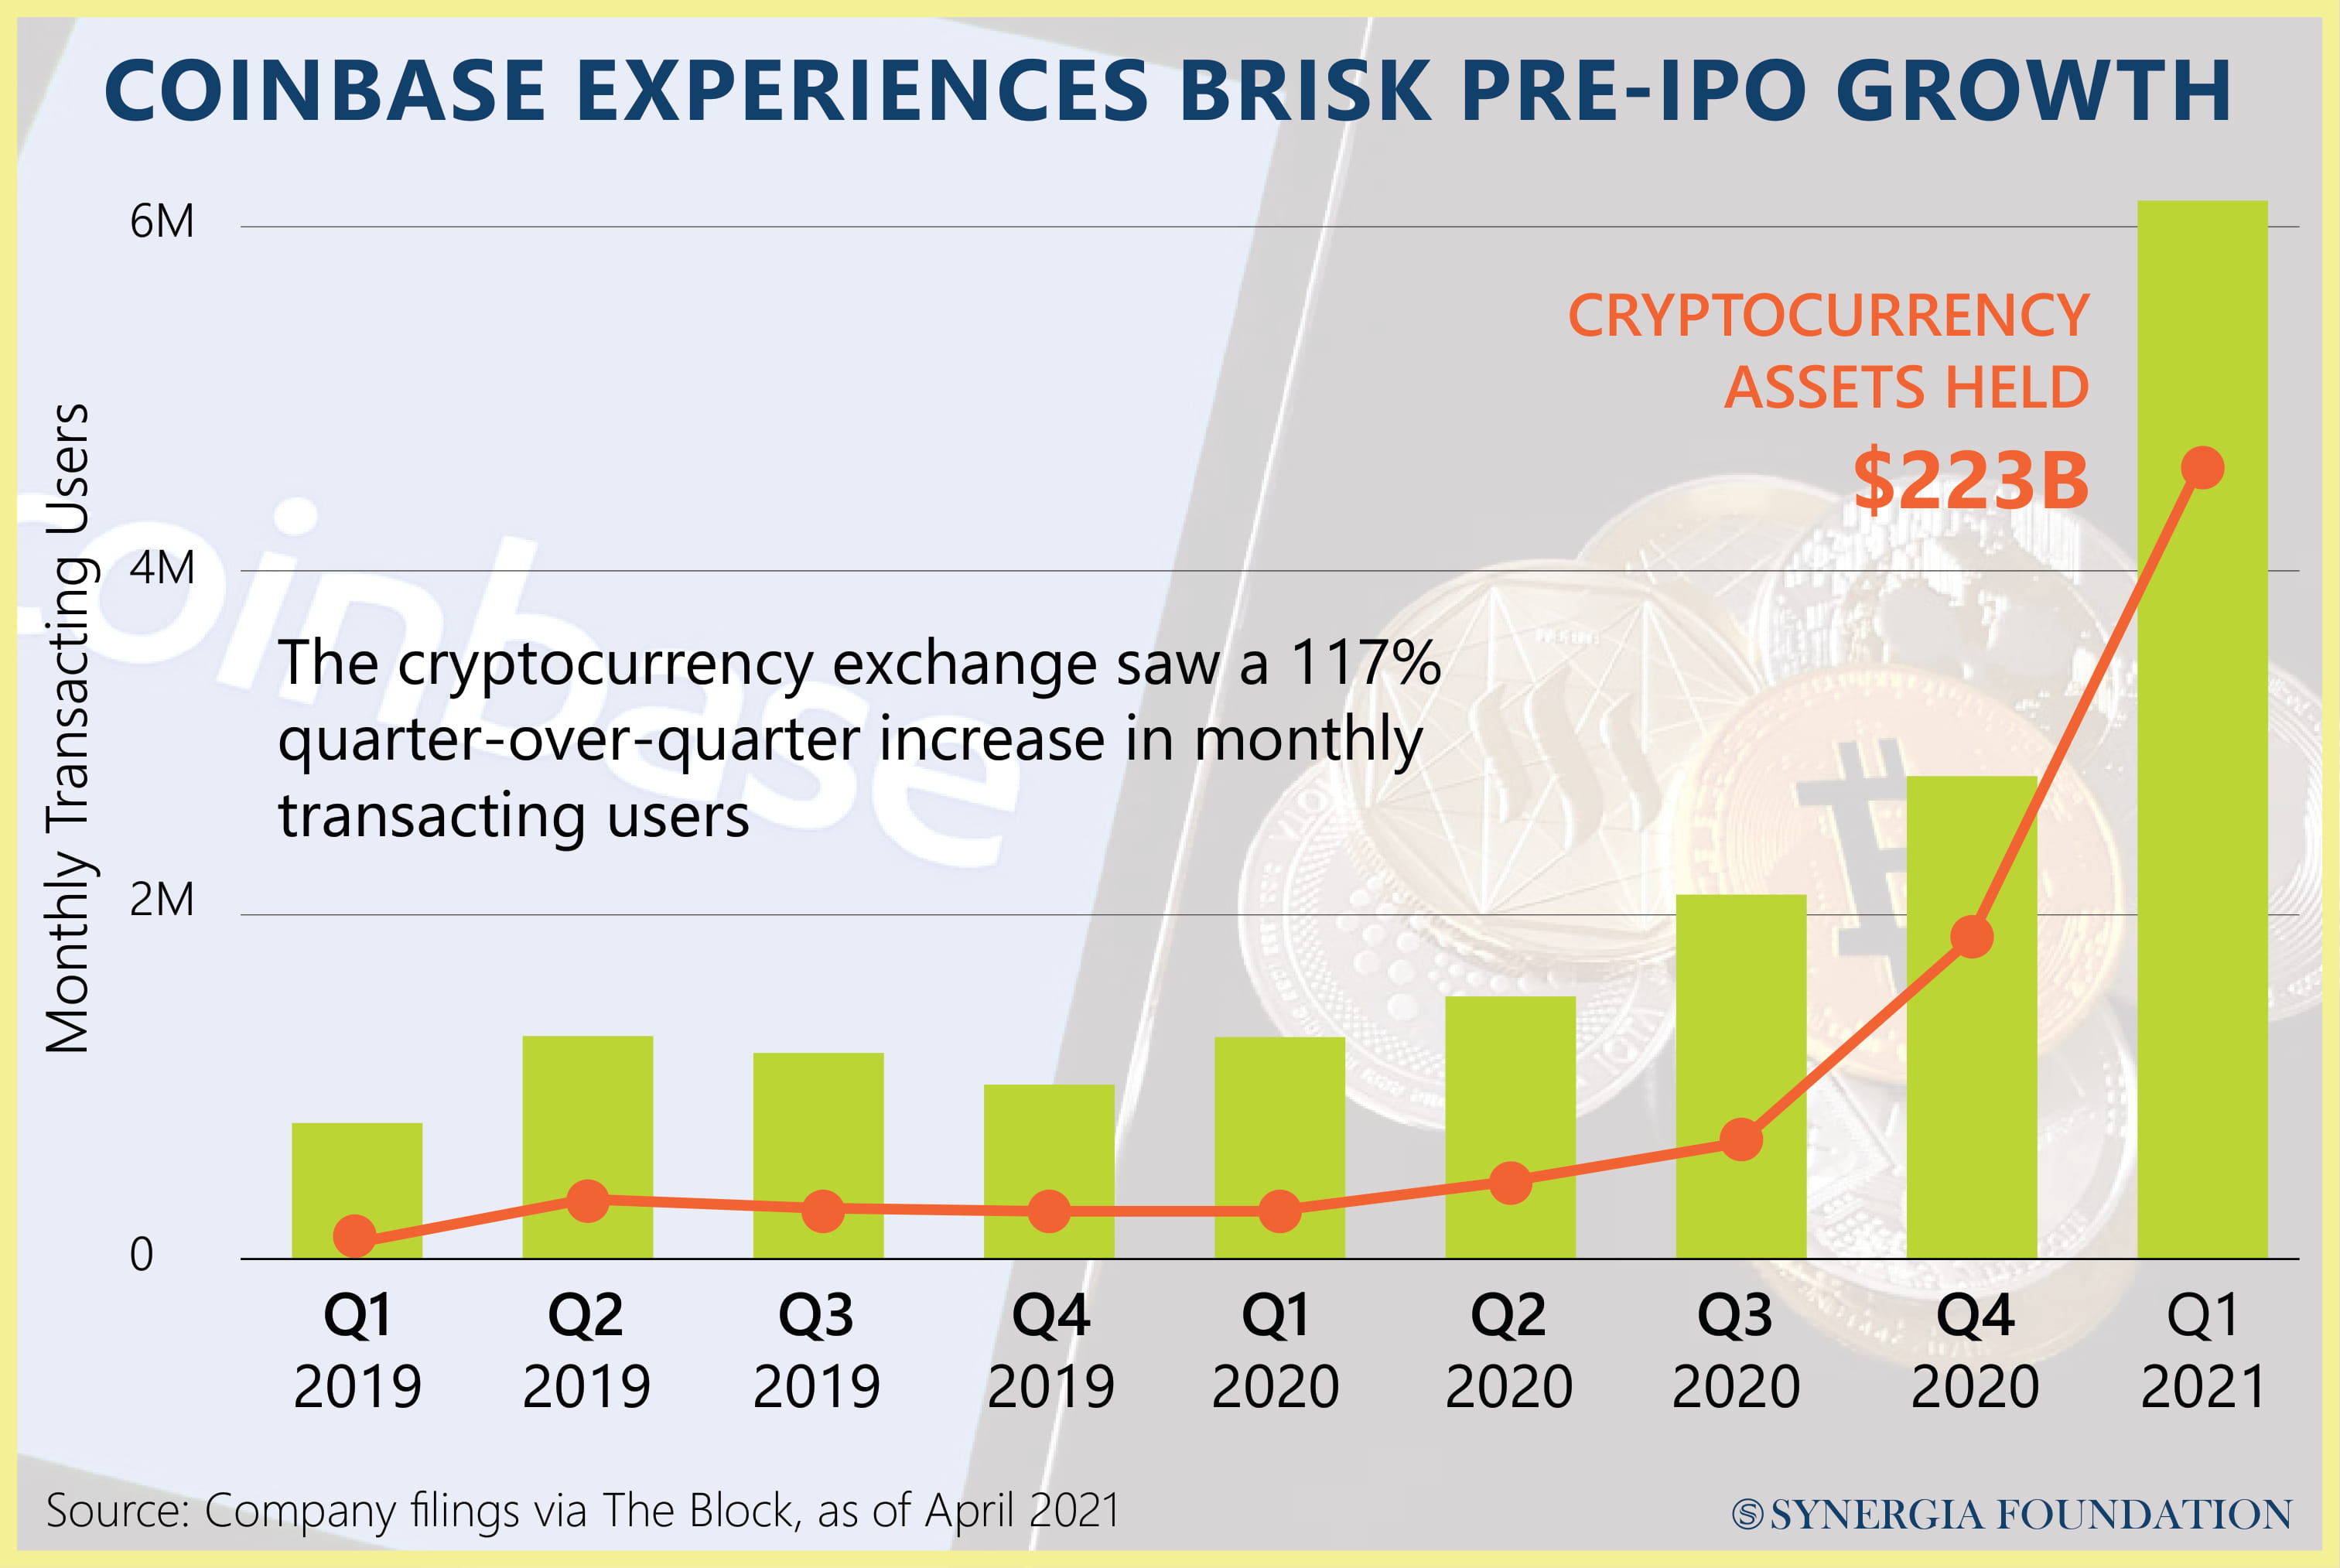 Coinbase experience brisk pre-ipo growth 